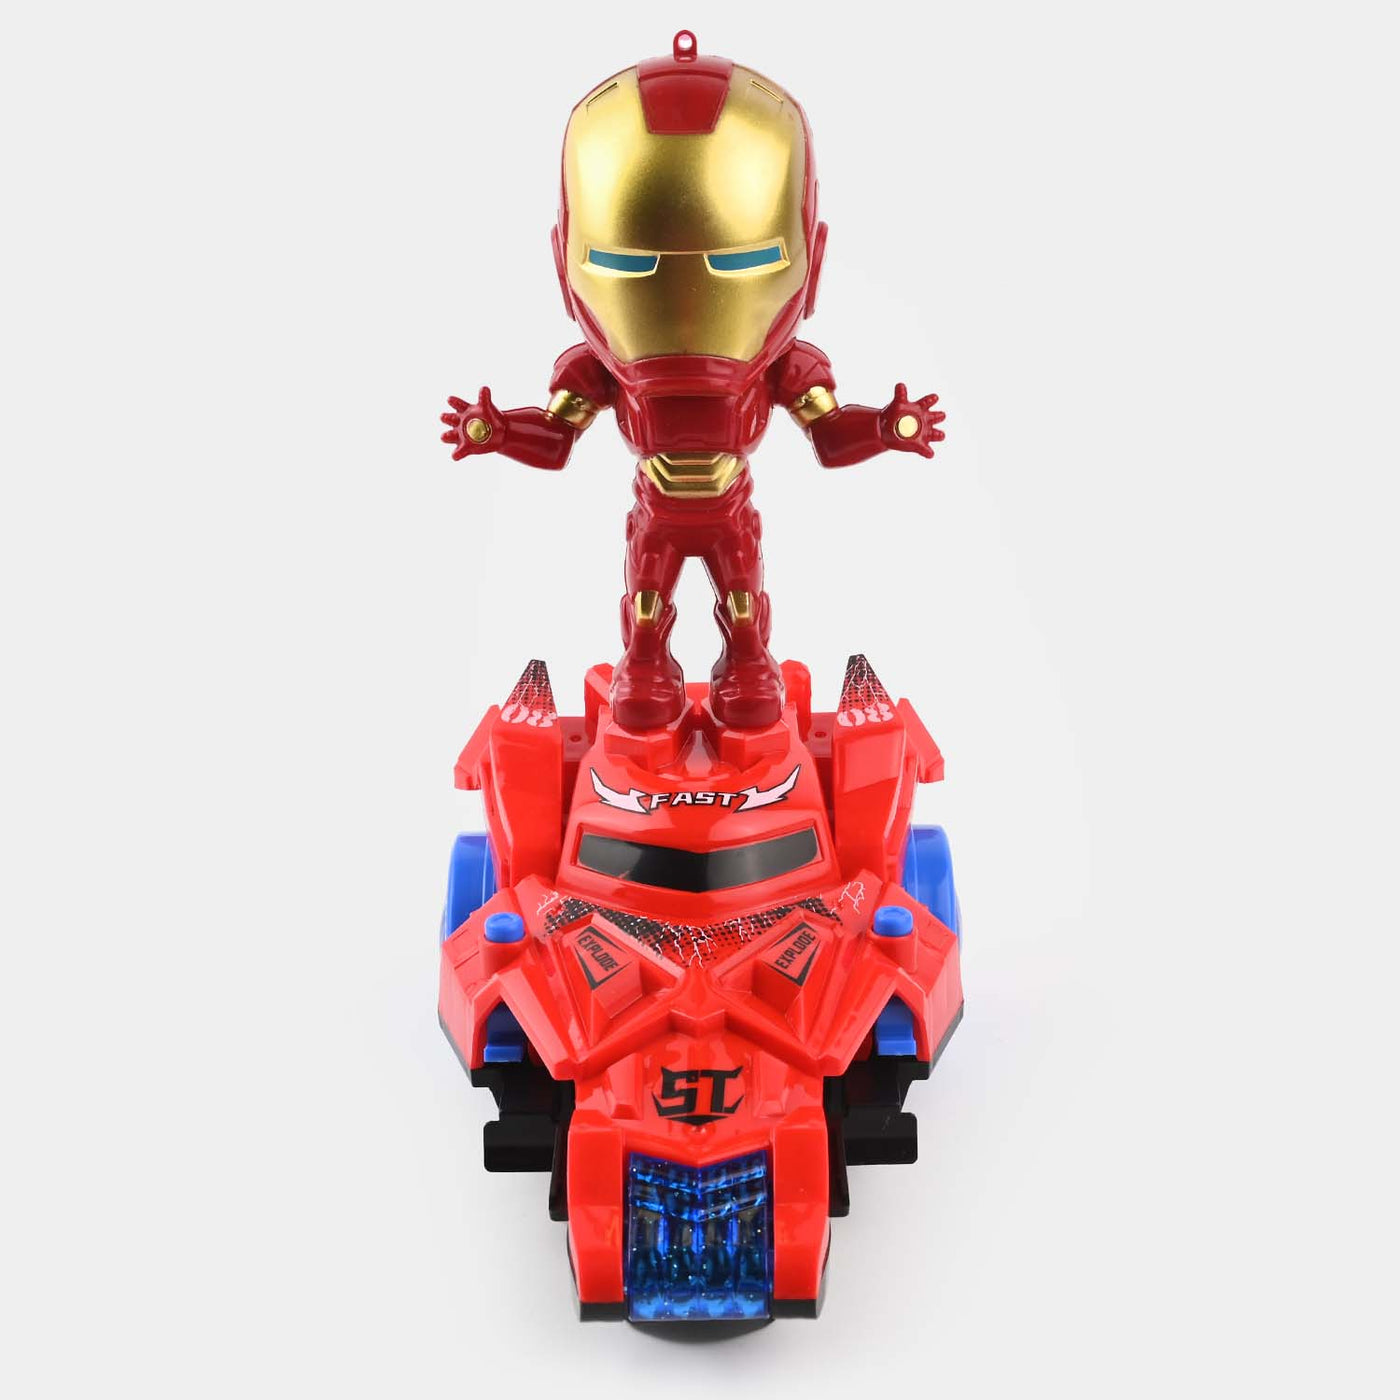 Electric Universal Ejection Car With Hero For Kids